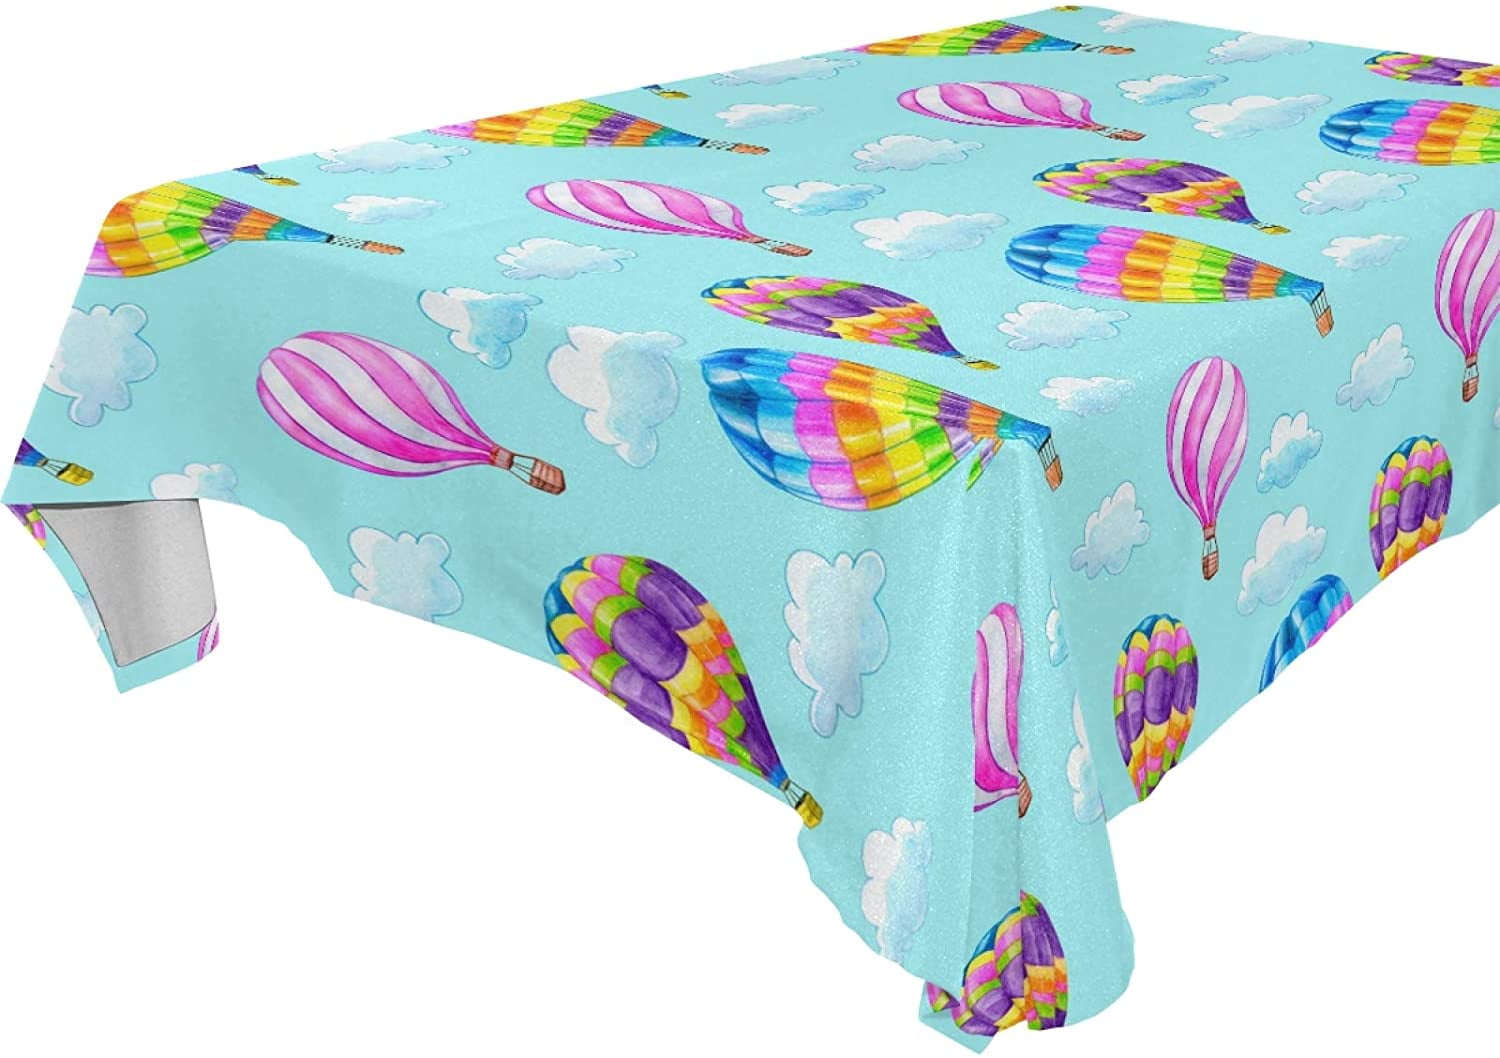 Qilmy Daisy Flower Tablecloth Durable Square Table Cloth Waterproof Stain Proof Camping Tablecloths for Outdoor Picnic Family Dinner Restaurant Decoration 54 x 72 Inch 